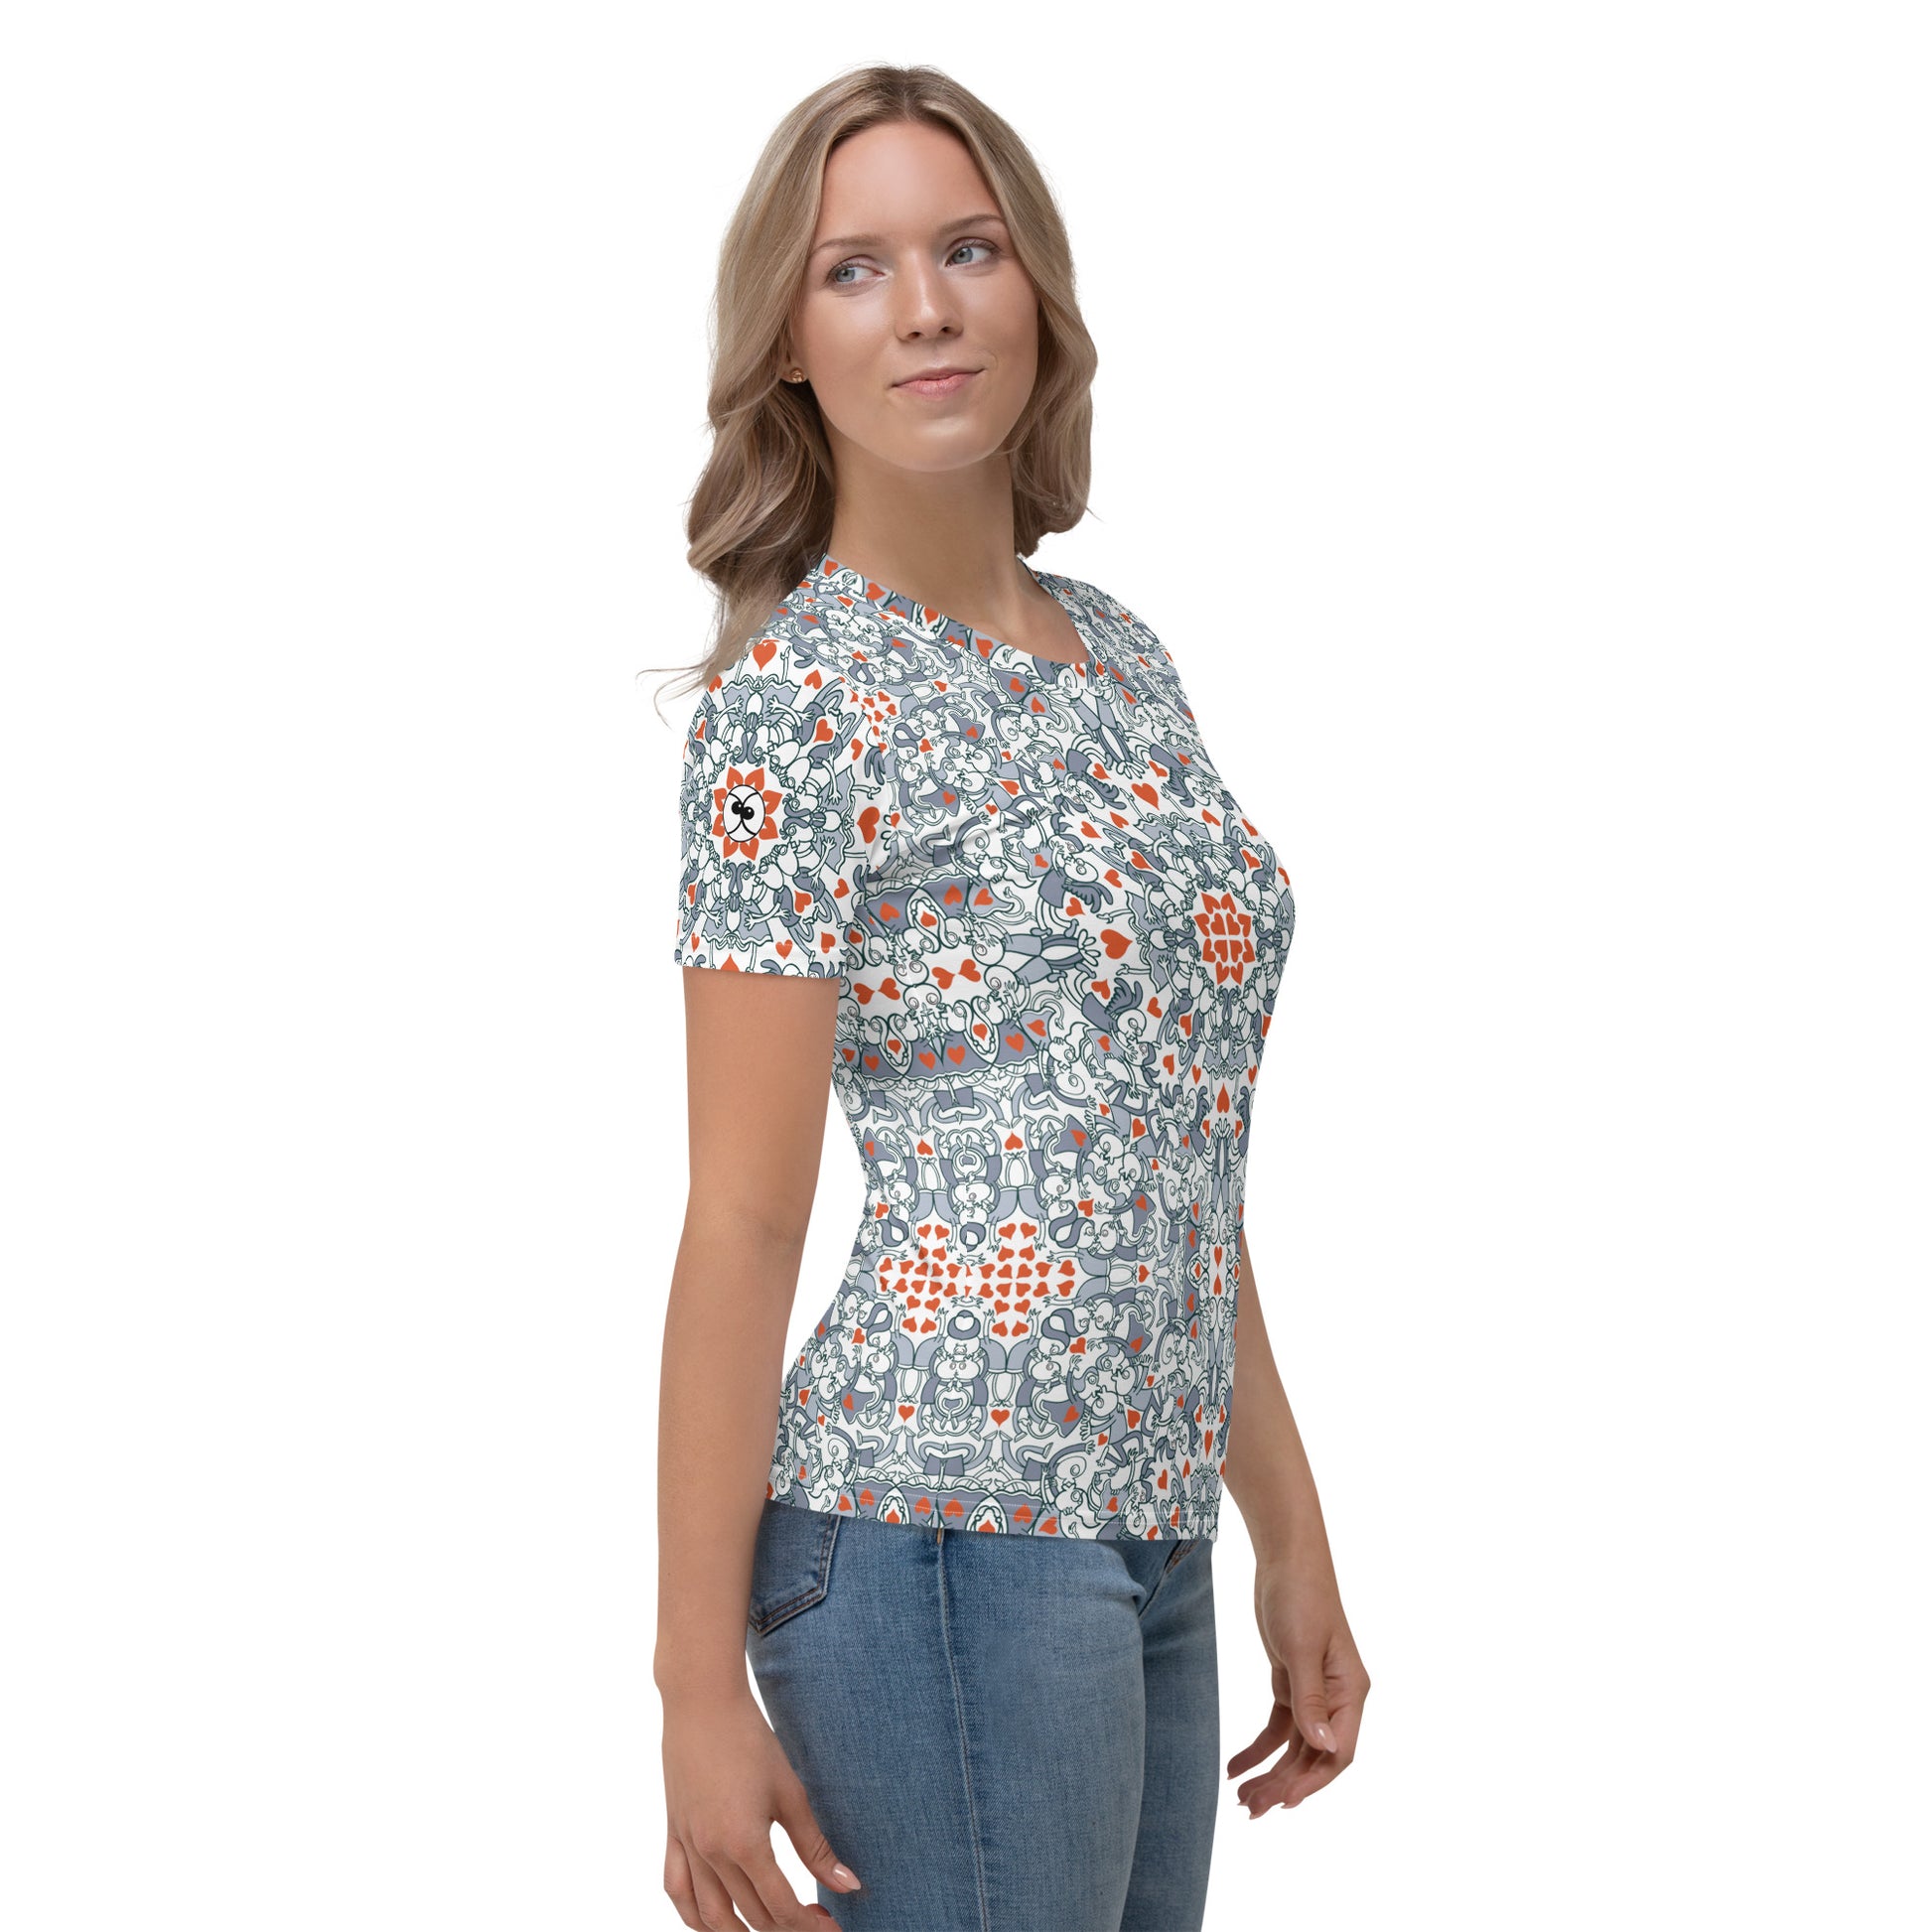 Kissed by Doodles in Valentine's Mandala Melody - Women's T-shirt. side view